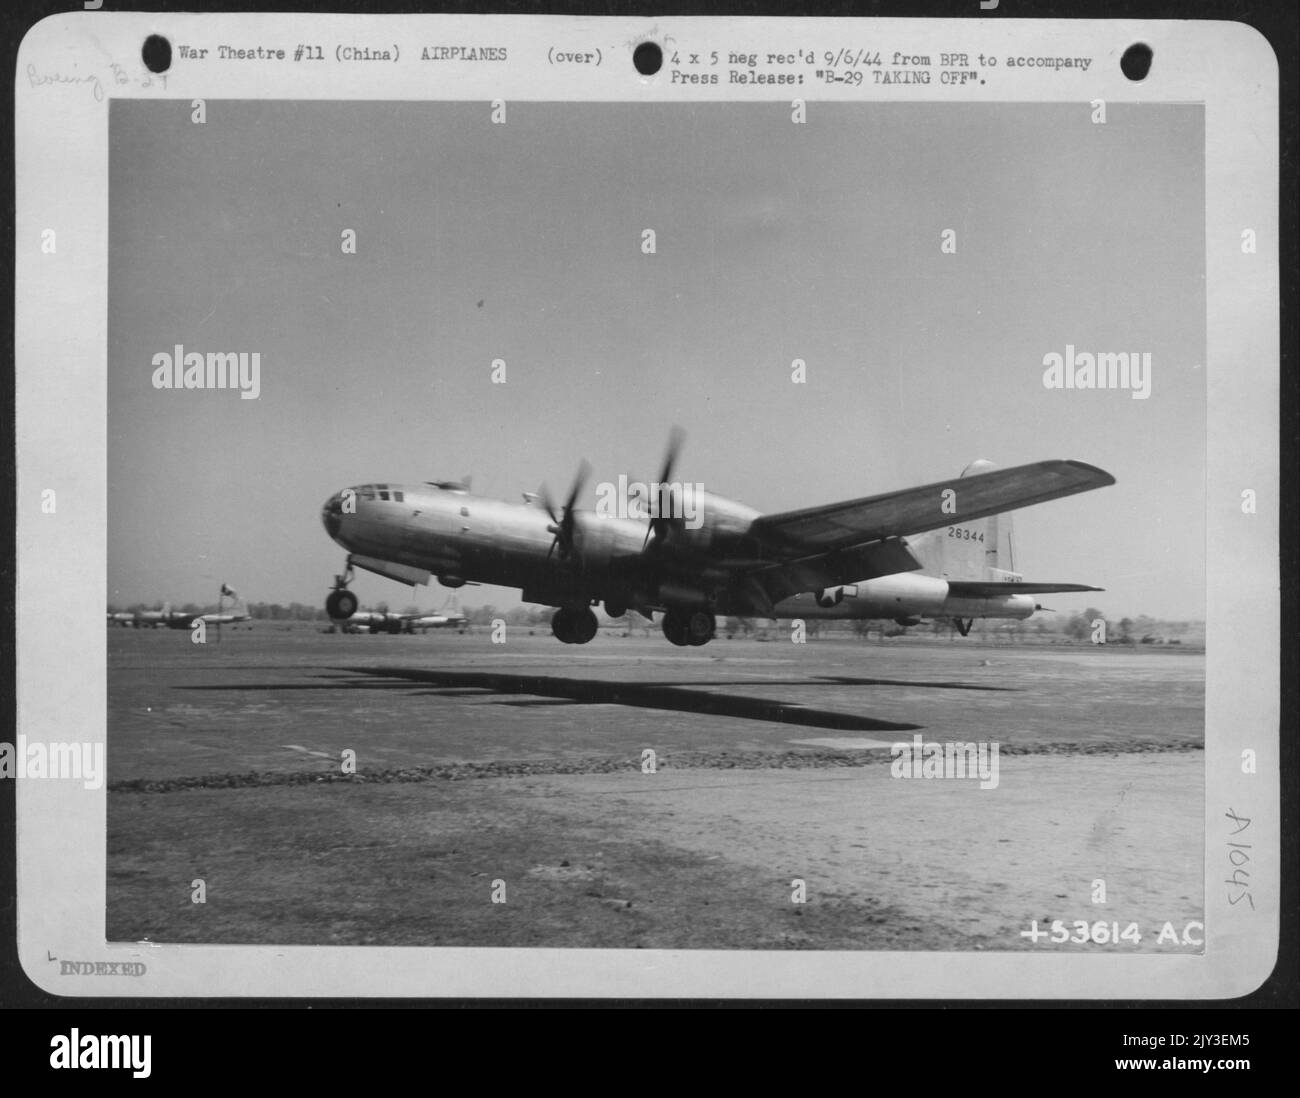 B-29 TAKING OFF - The Army's huge new plane, the Boeing B-29 Superfortress bomber, is seen taking off for a flight. - CHINA Stock Photo